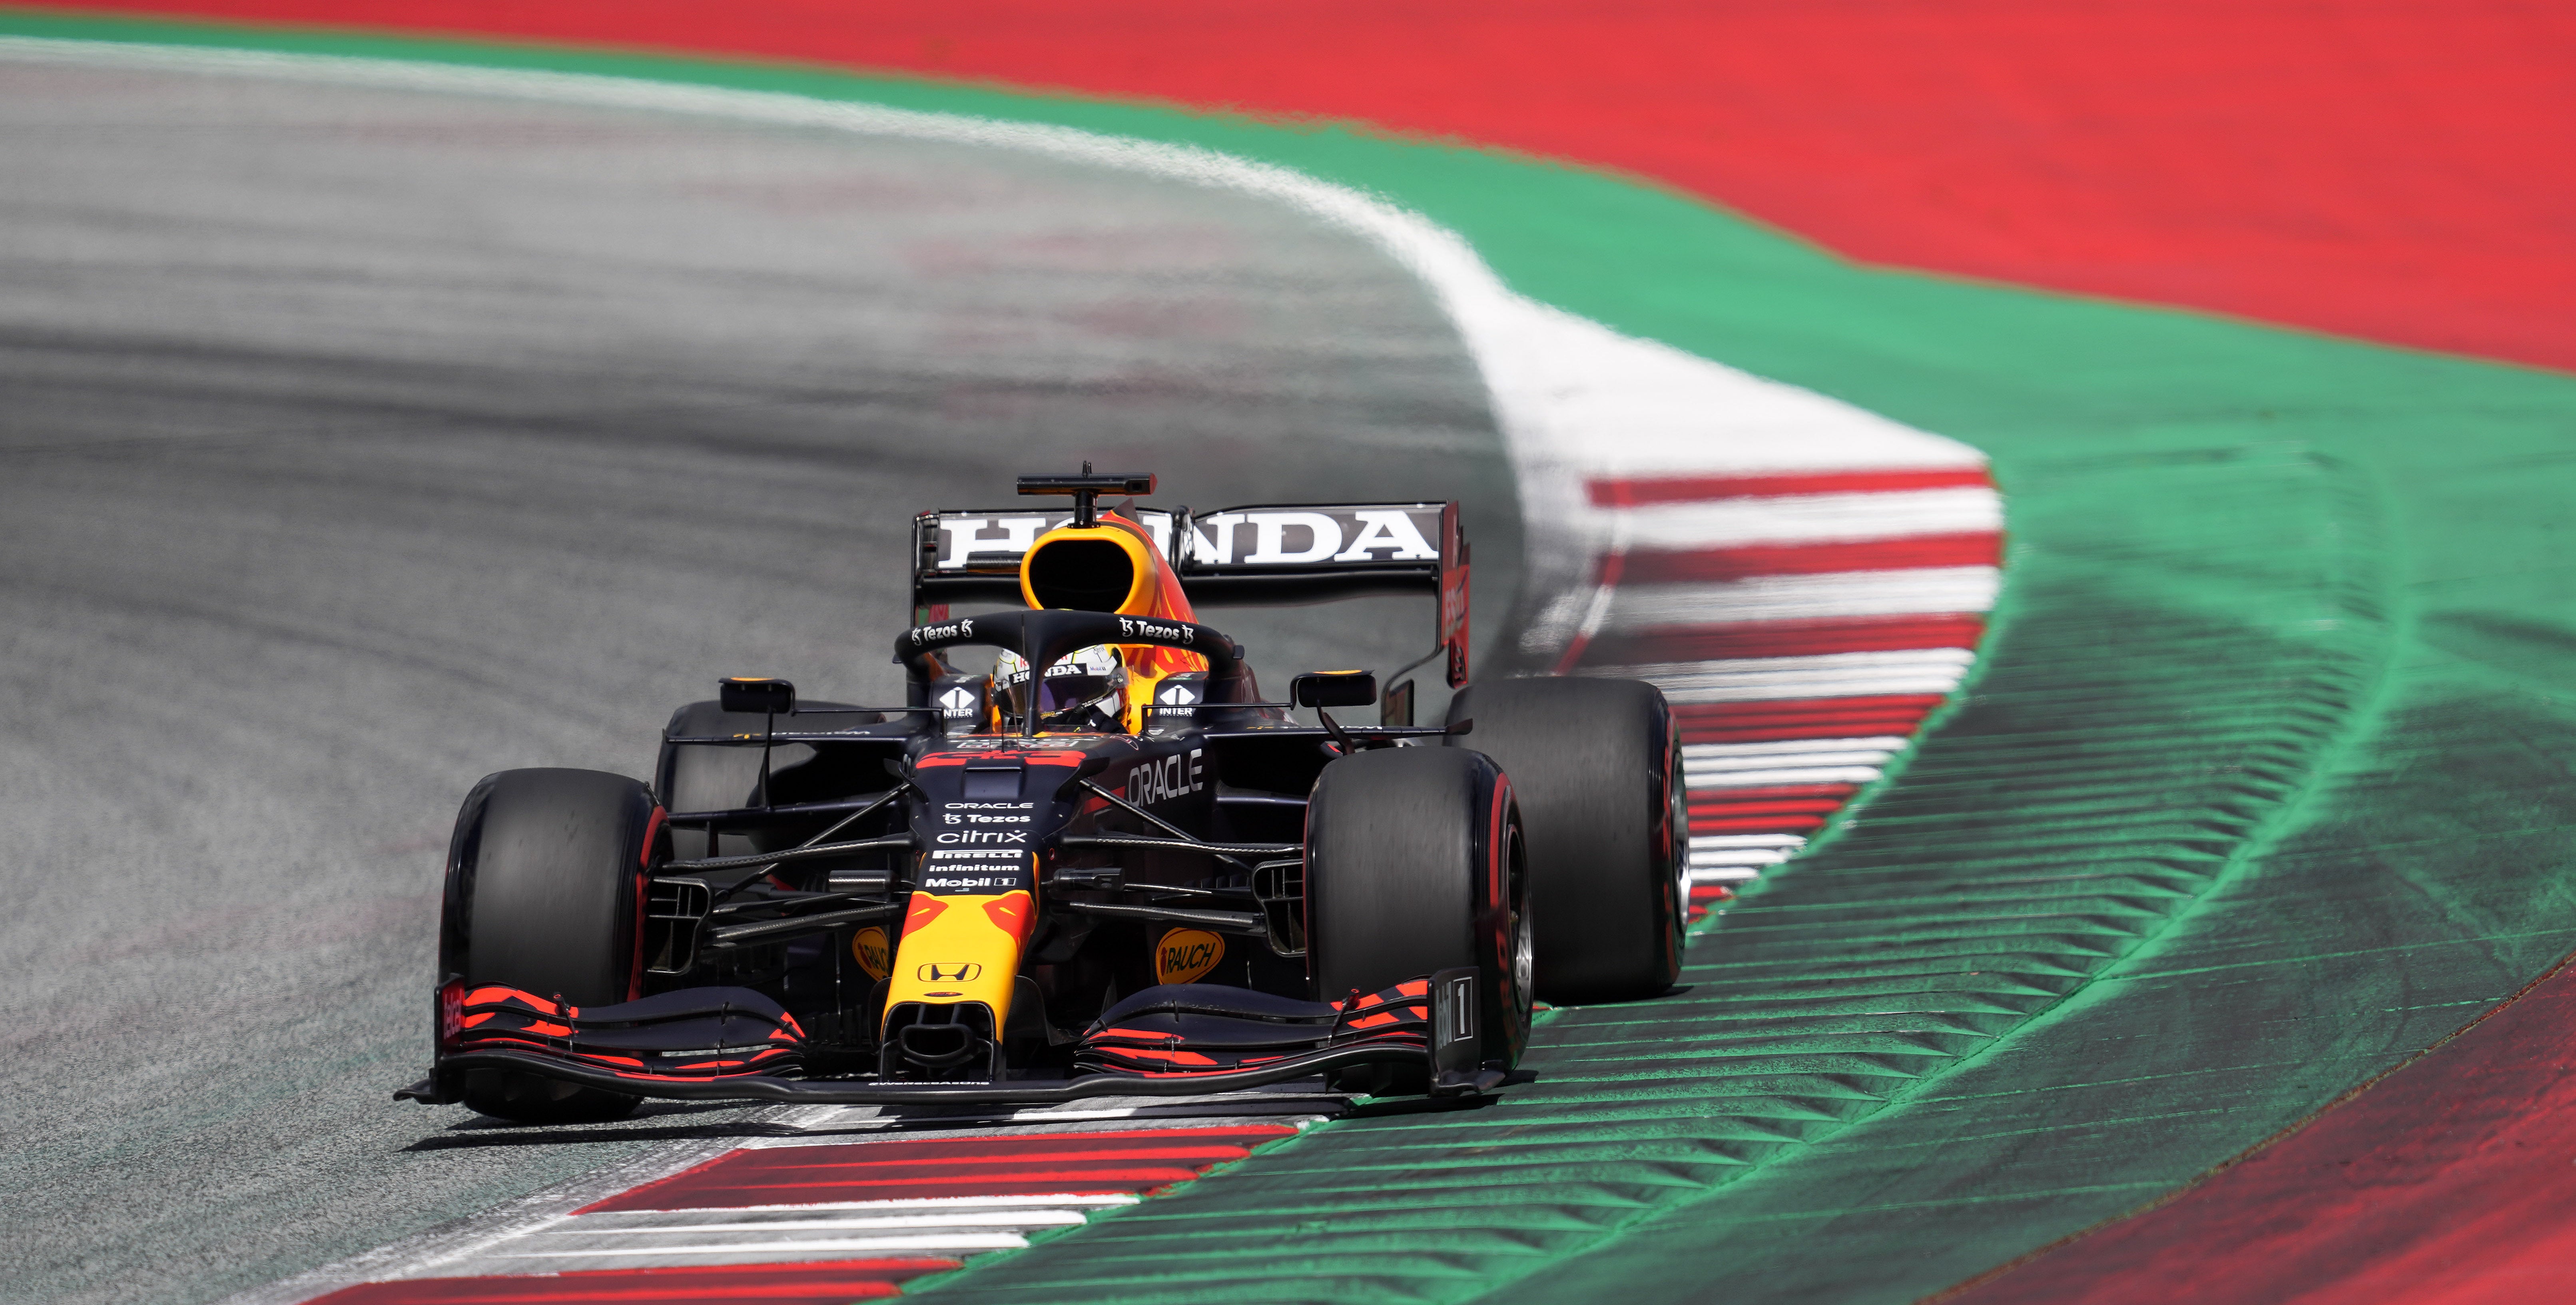 Red Bull driver Max Verstappen takes pole position for Sunday's Styrian Grand Prix